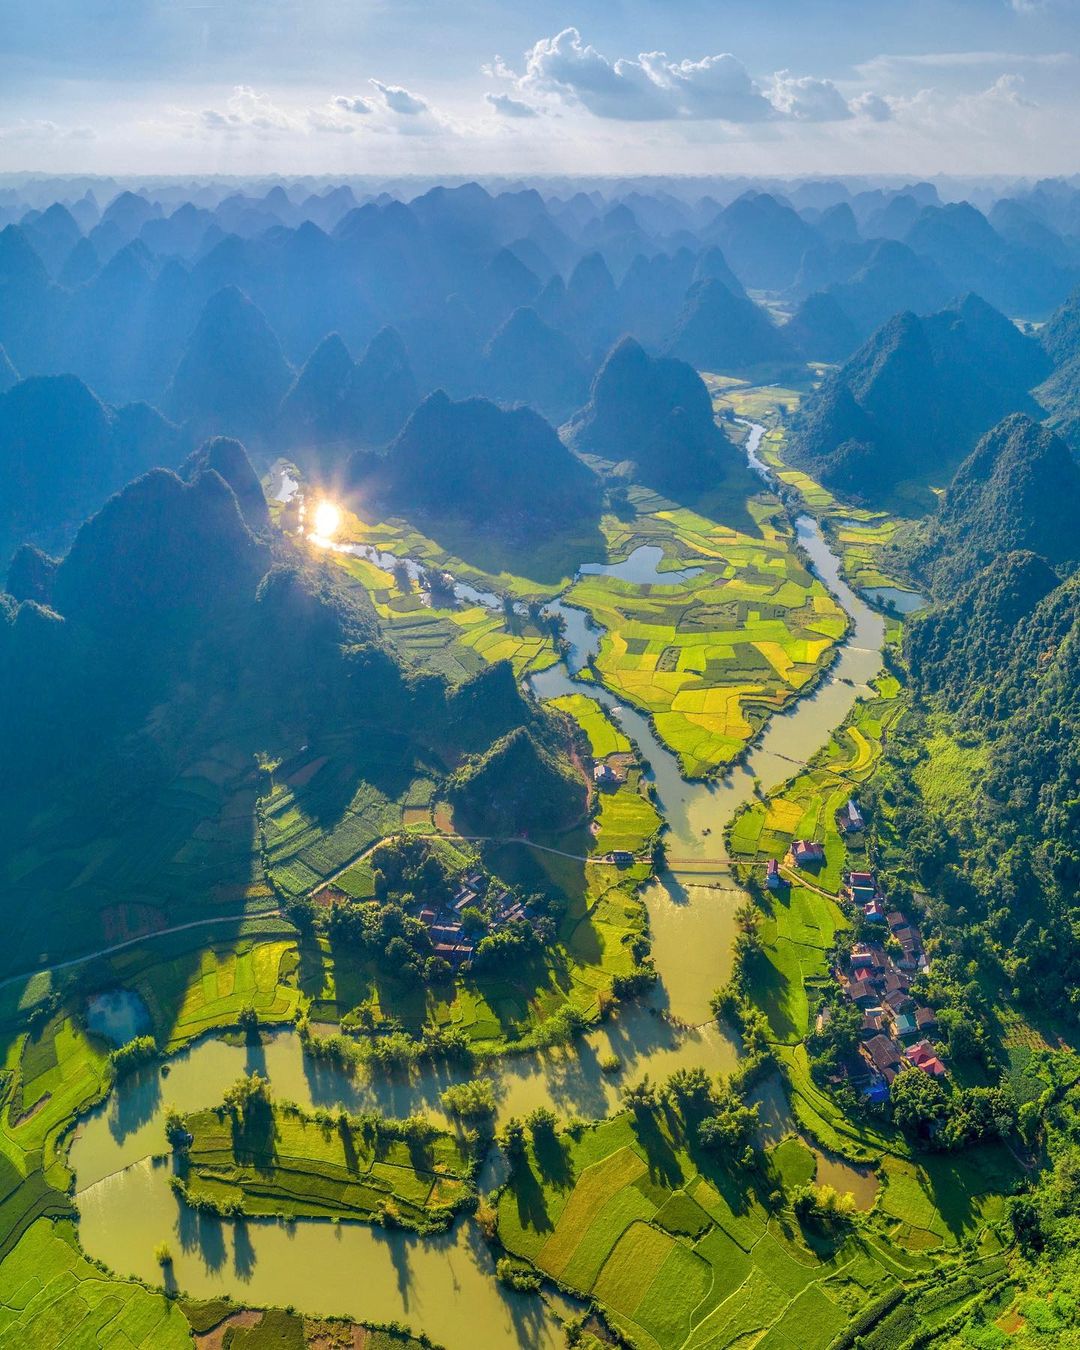 Superb aerial photography of Vietnam’s Countryside by Pham Huy Trung